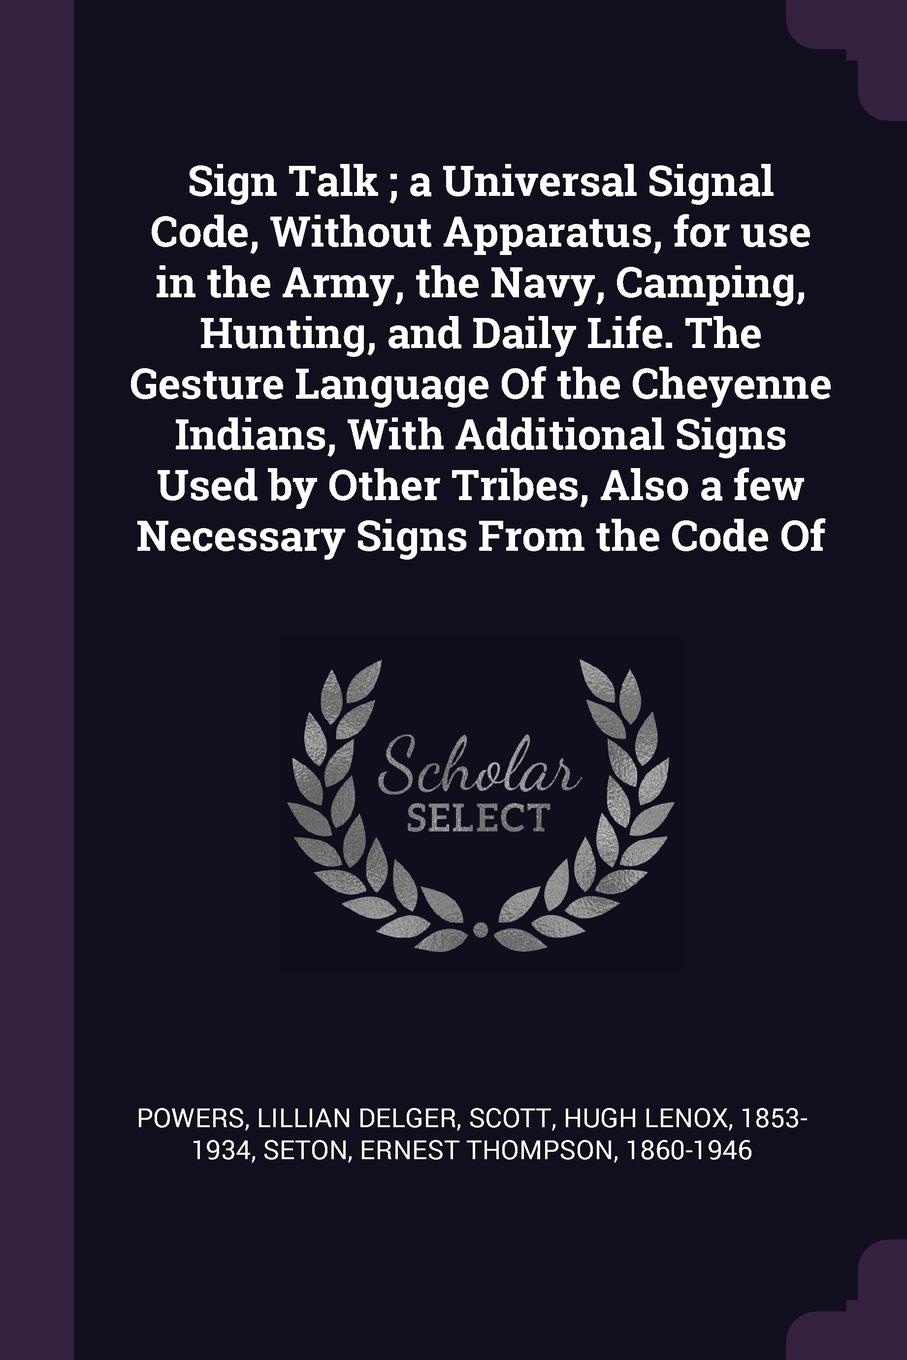 Sign Talk ; a Universal Signal Code, Without Apparatus, for use in the Army, the Navy, Camping, Hunting, and Daily Life. The Gesture Language Of the Cheyenne Indians, With Additional Signs Used by Other Tribes, Also a few Necessary Signs From the ...